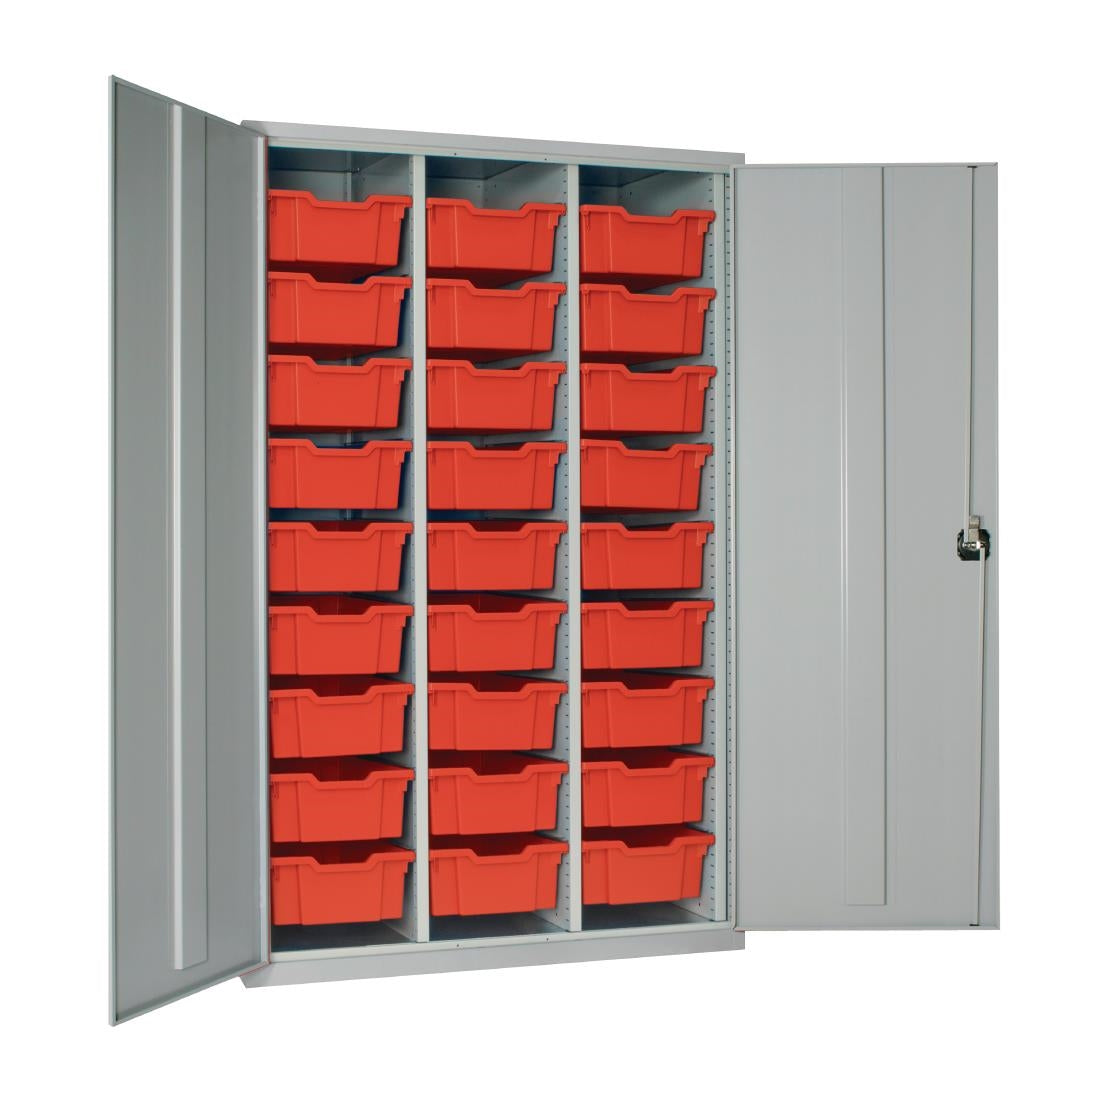 27 Tray High-Capacity Storage Cupboard - Grey with Red Trays